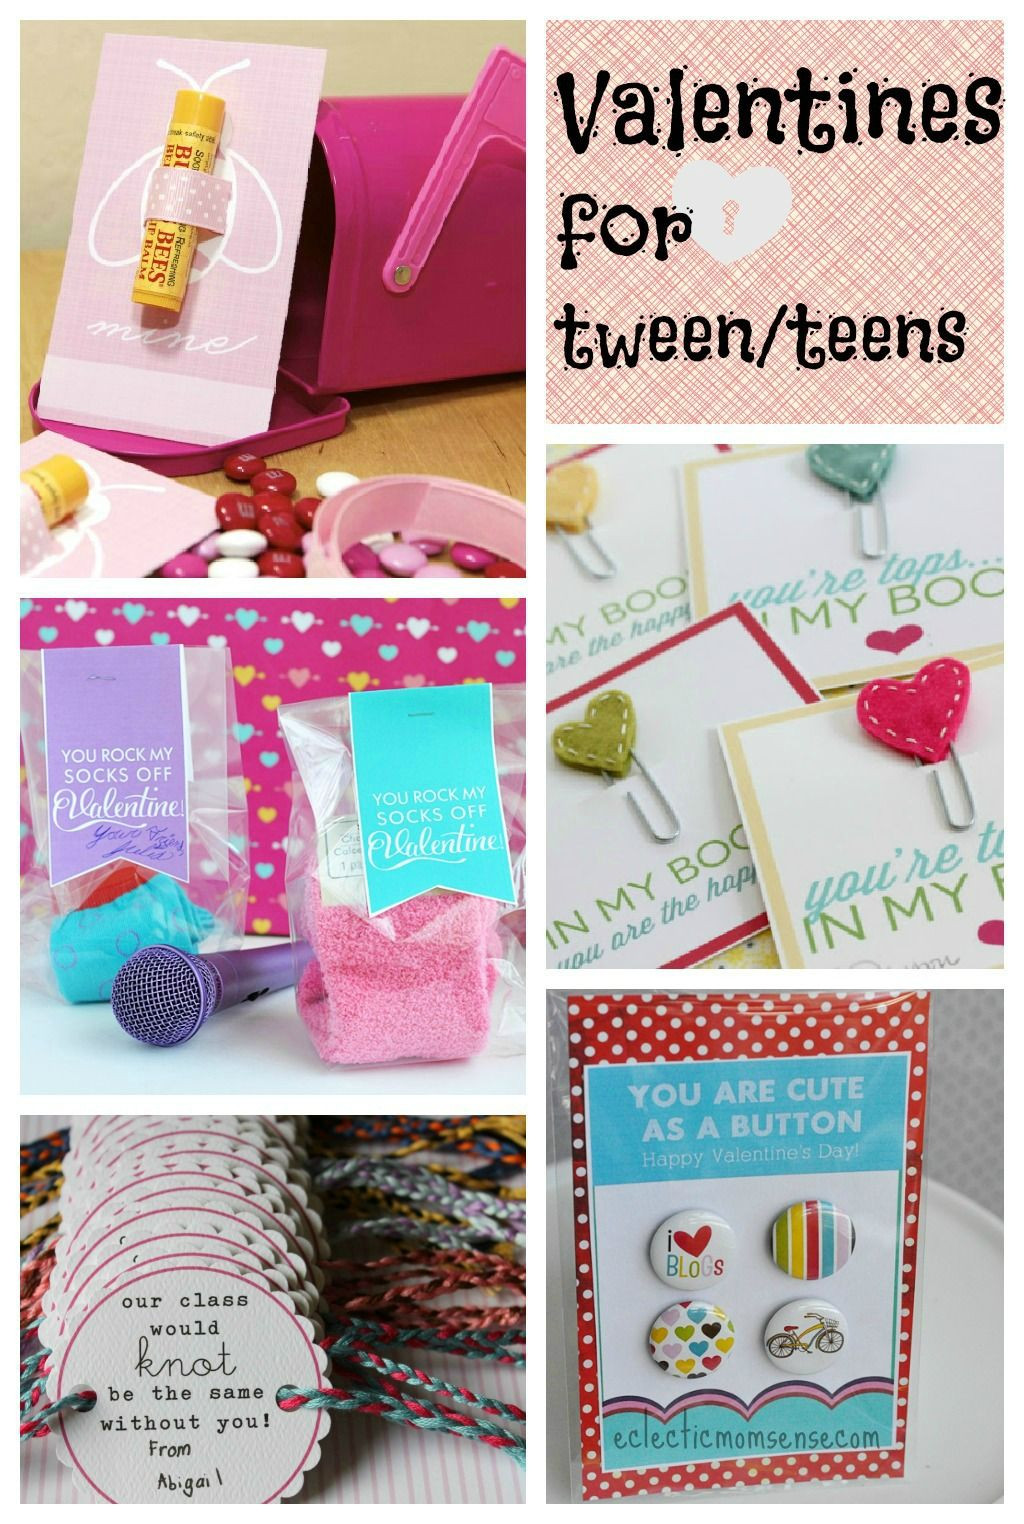 Valentines Gift Ideas For Teens
 Valentines Ideas for Tween Teens via Kelly Eclectic